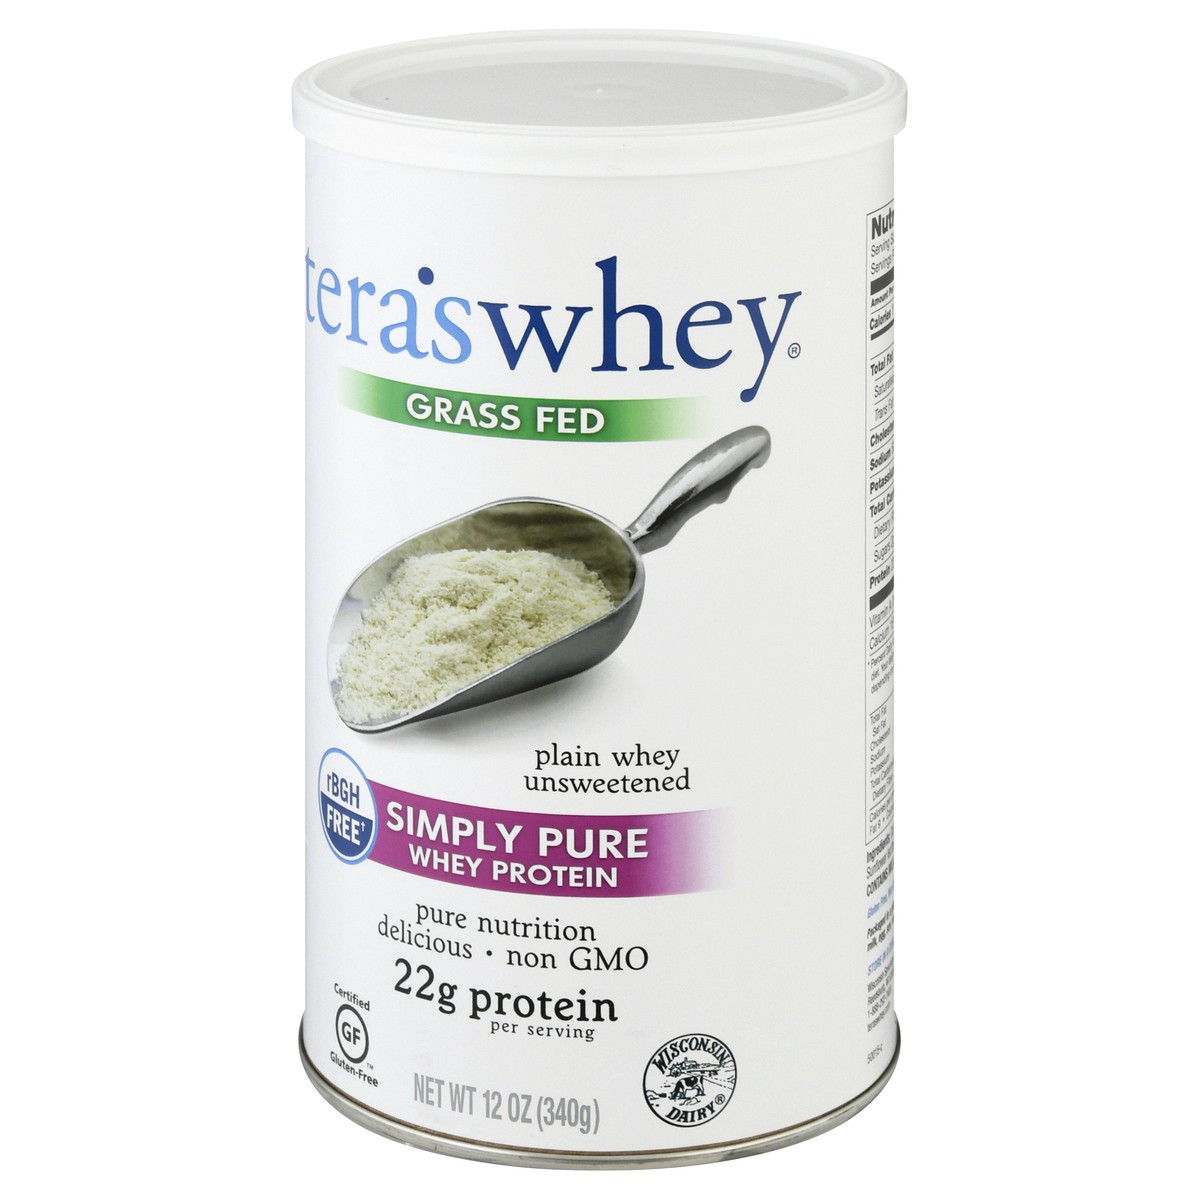 slide 3 of 9, Tera's Whey Simply Pure Grass Fed Plain Unsweetened Whey Protein 12 oz, 12 oz